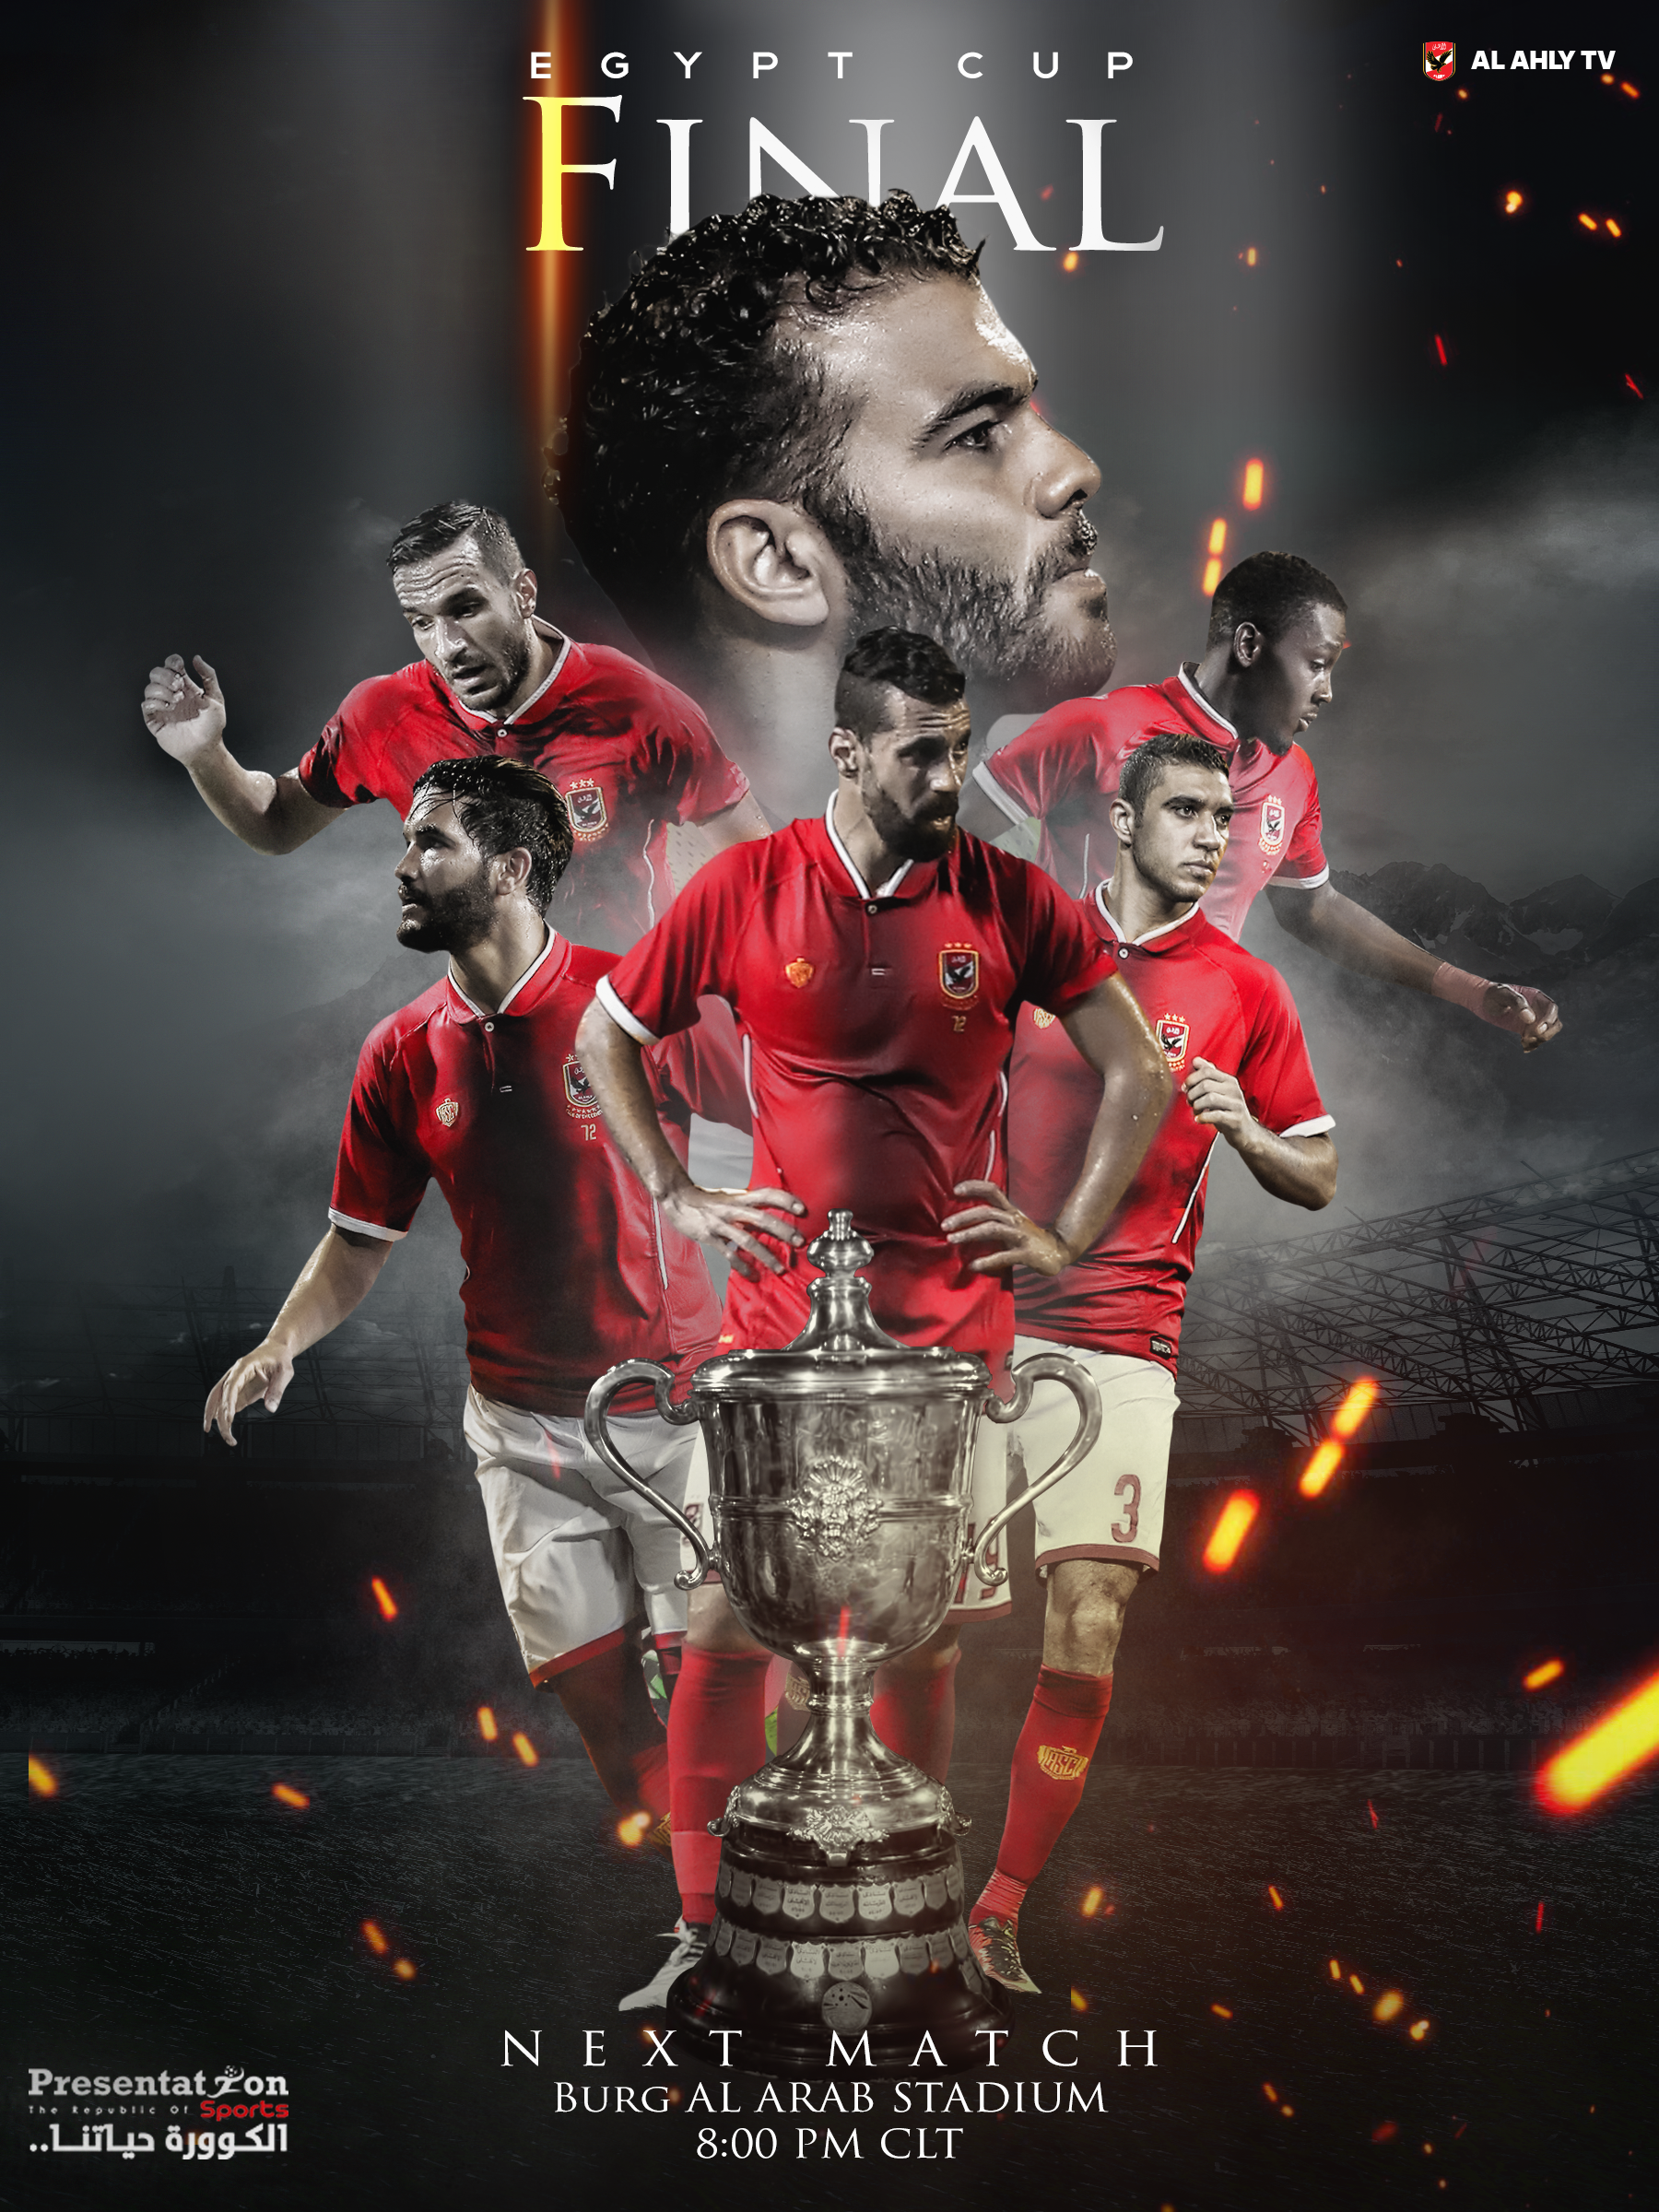 Egypt cup